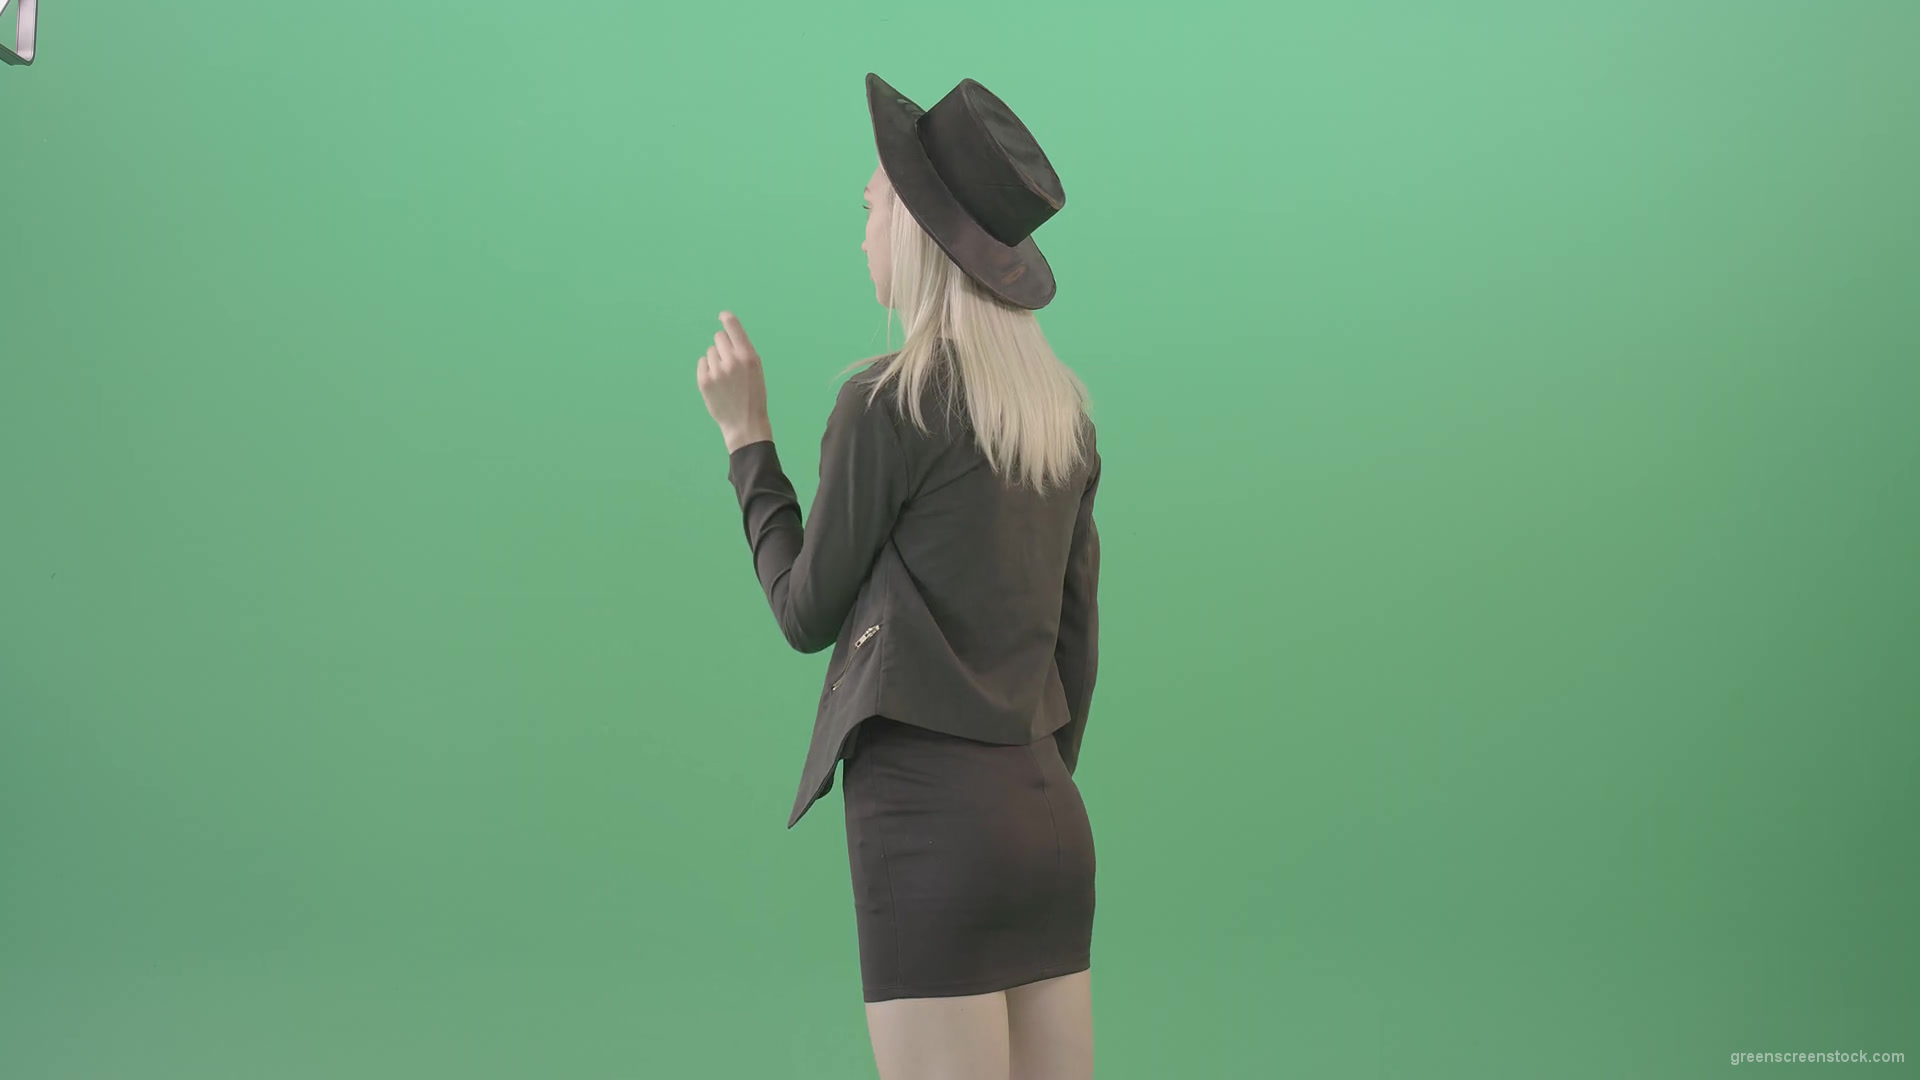 Back-view-black-costume-blonde-girl-looking-virtual-products-on-touch-screen-4K-Green-Screen-Video-Footage-1920_006 Green Screen Stock